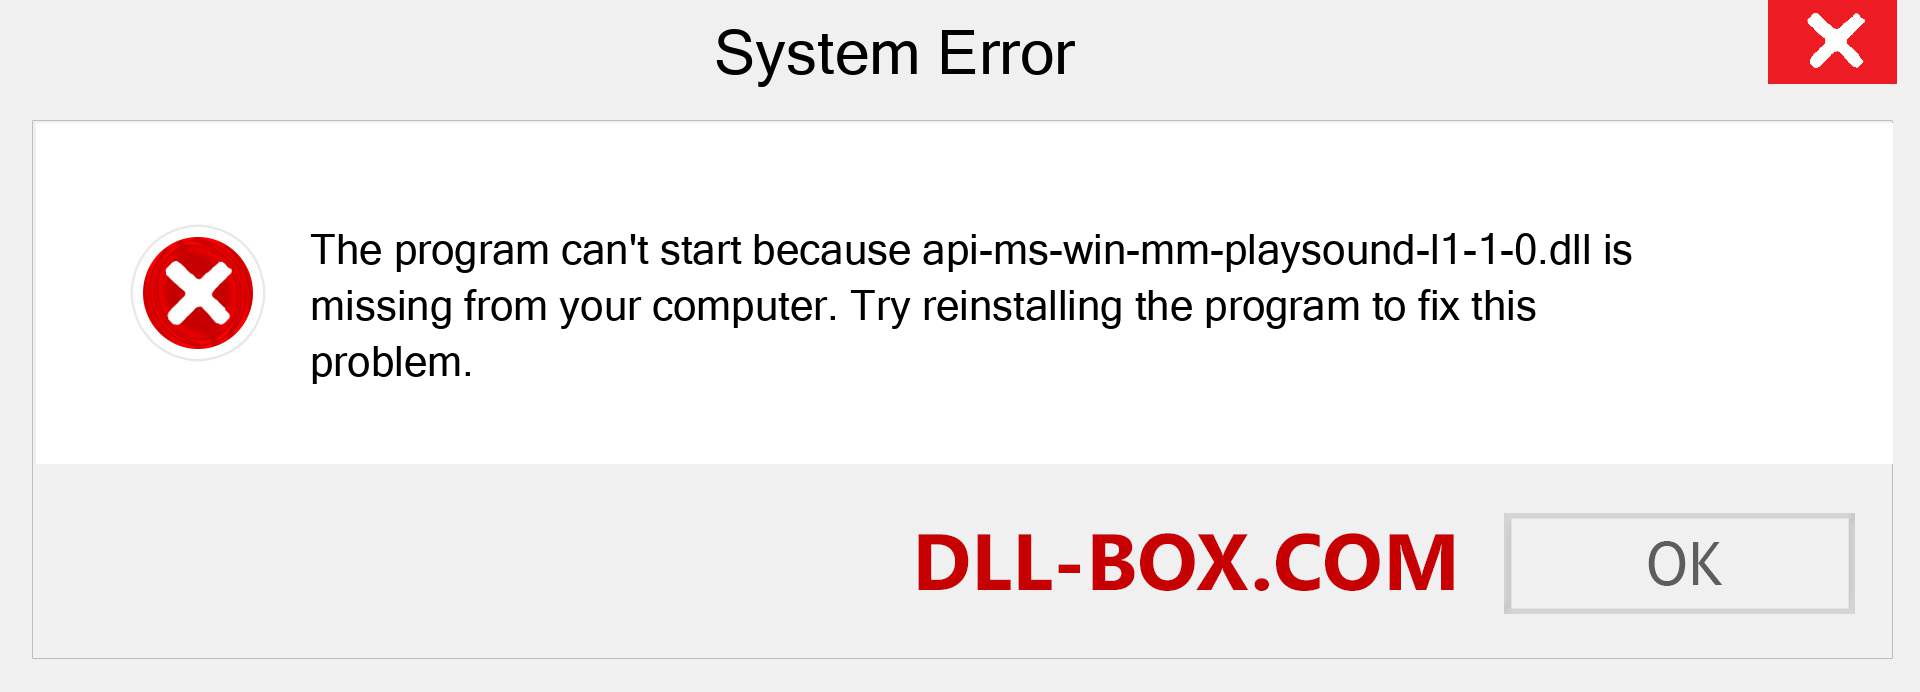  api-ms-win-mm-playsound-l1-1-0.dll file is missing?. Download for Windows 7, 8, 10 - Fix  api-ms-win-mm-playsound-l1-1-0 dll Missing Error on Windows, photos, images